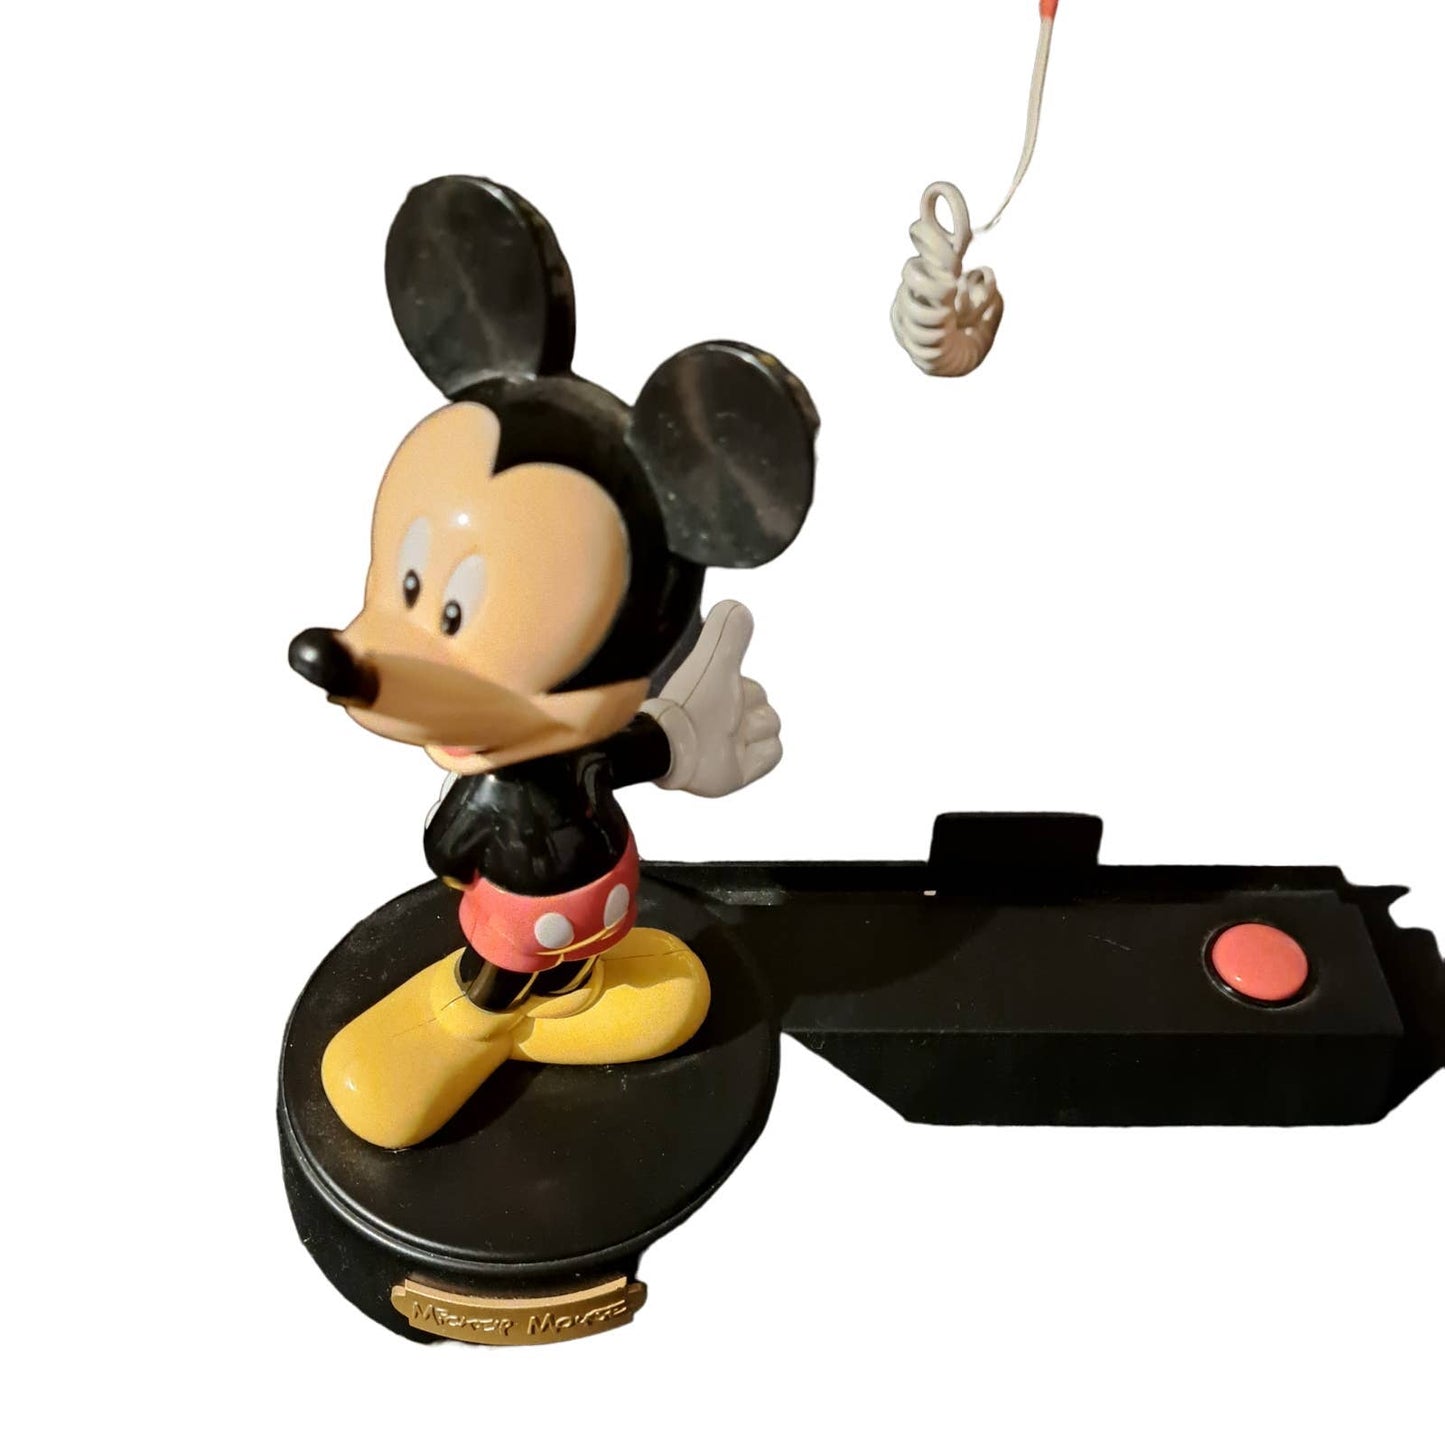 Fabulous and FUN Valentines Gift set! Vintage WORKING Mickey Mouse Phone PLUS